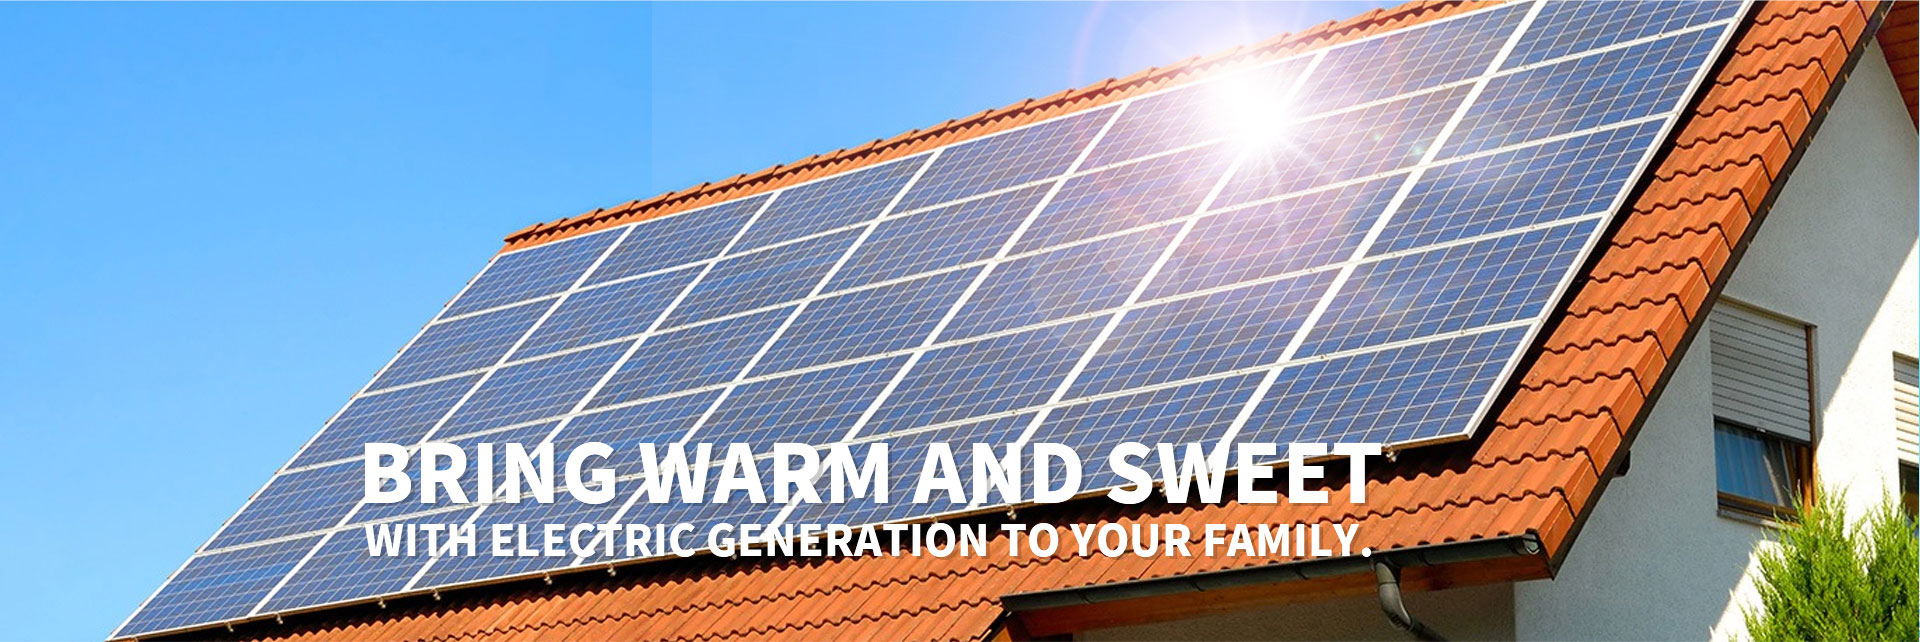 Bring Warm and Sweet with electric generation to your family